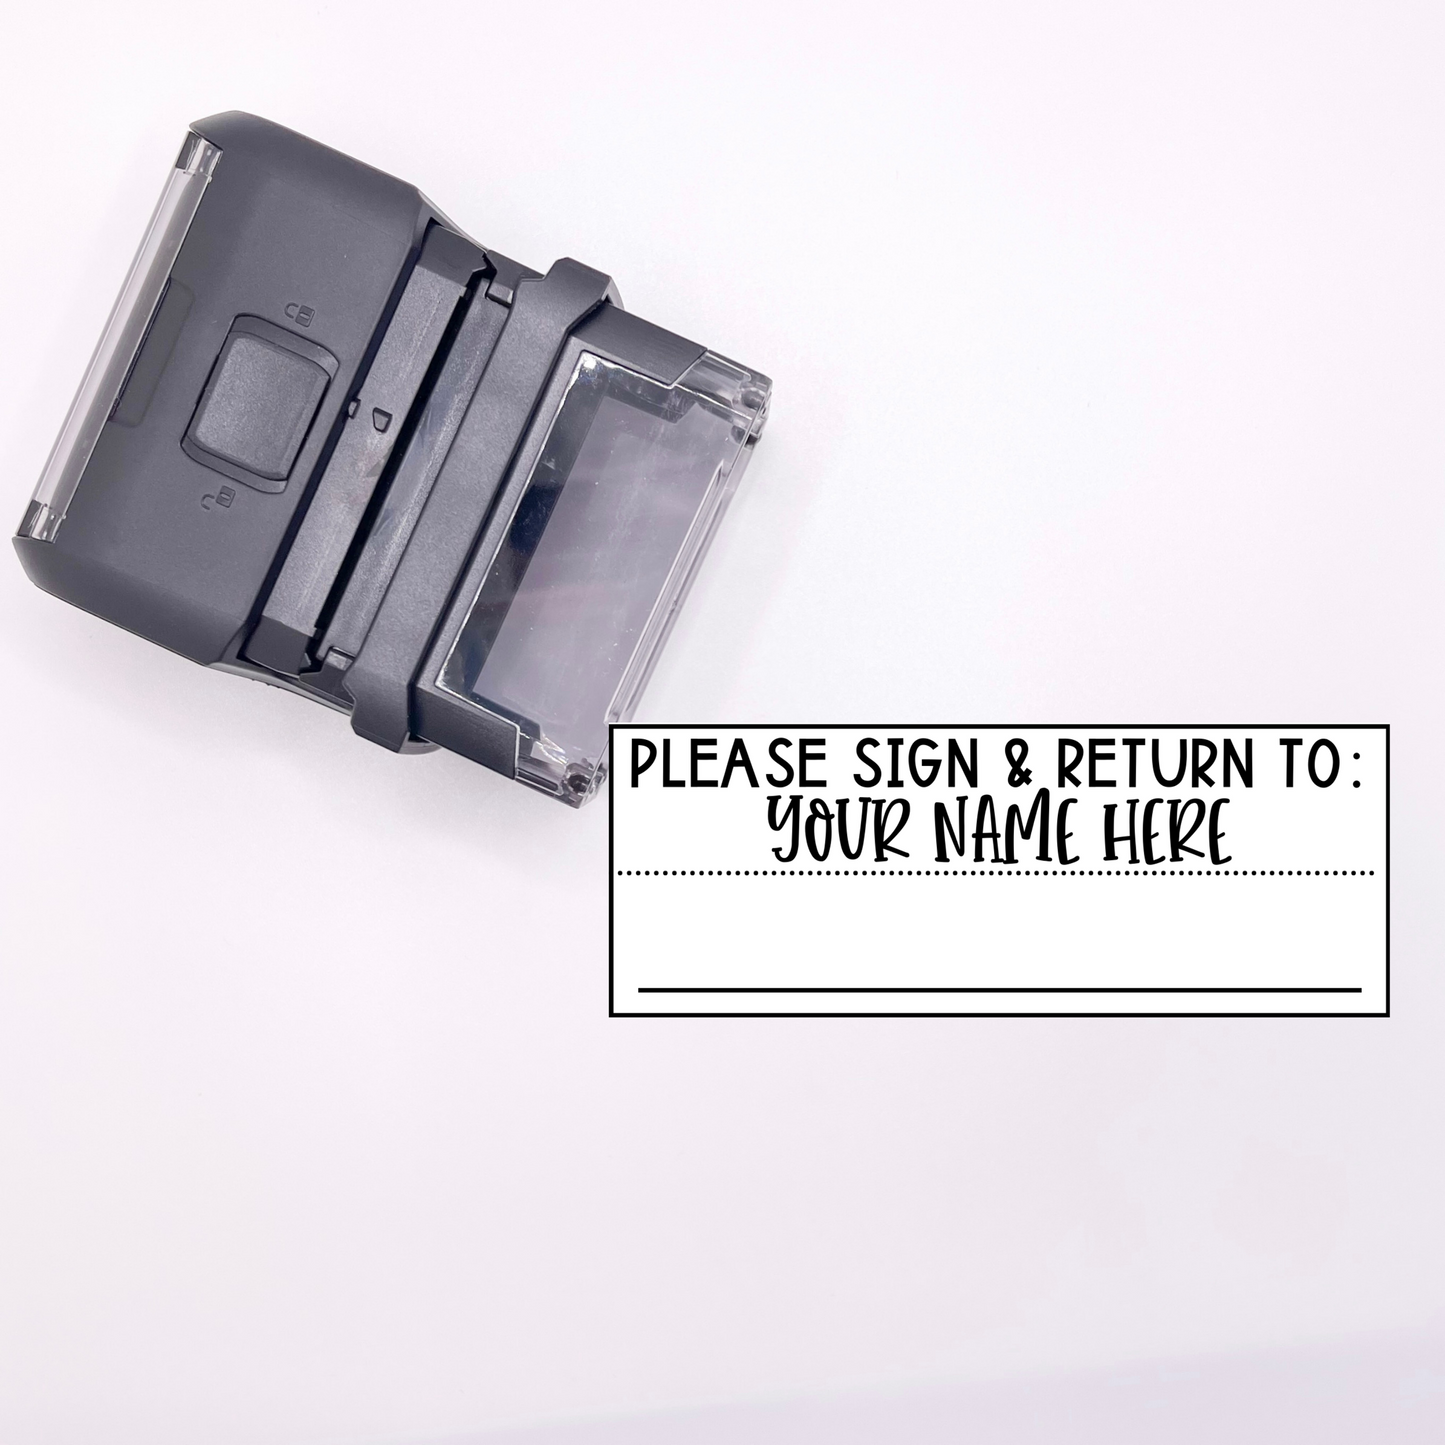 "Please sign & return to" Self-Inking Stamp (ENGLISH VERSION)